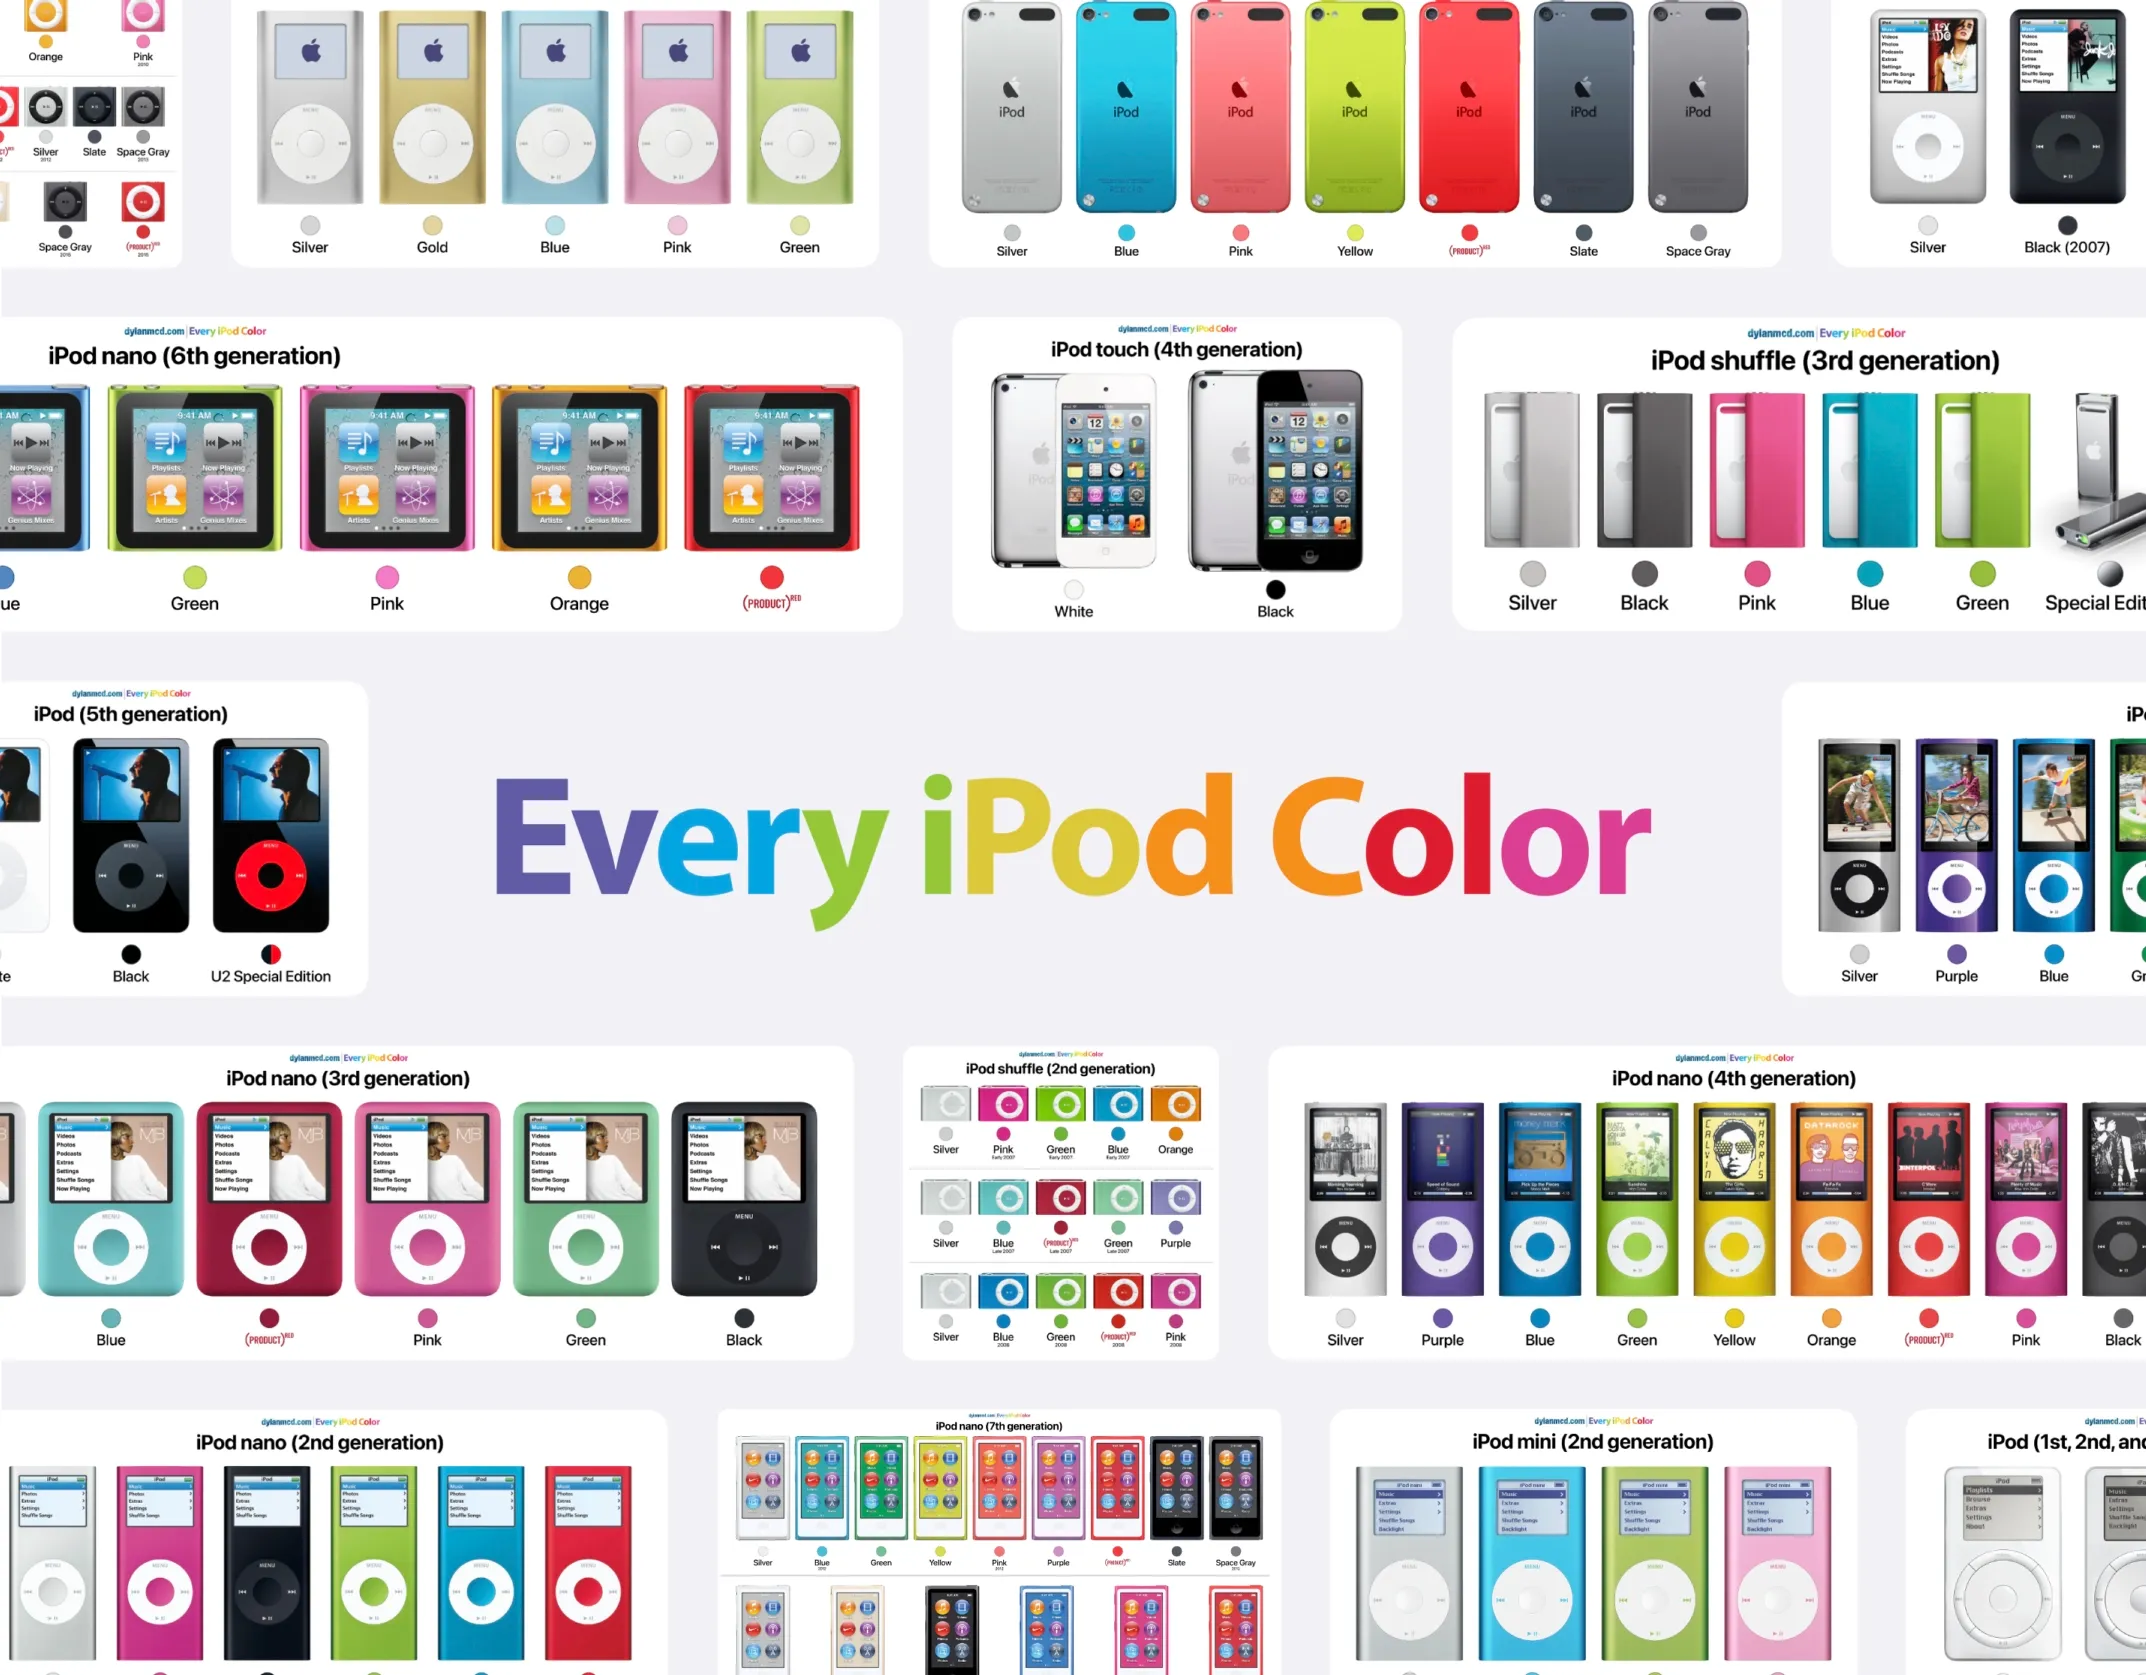 A collage of various iPod models in various colors